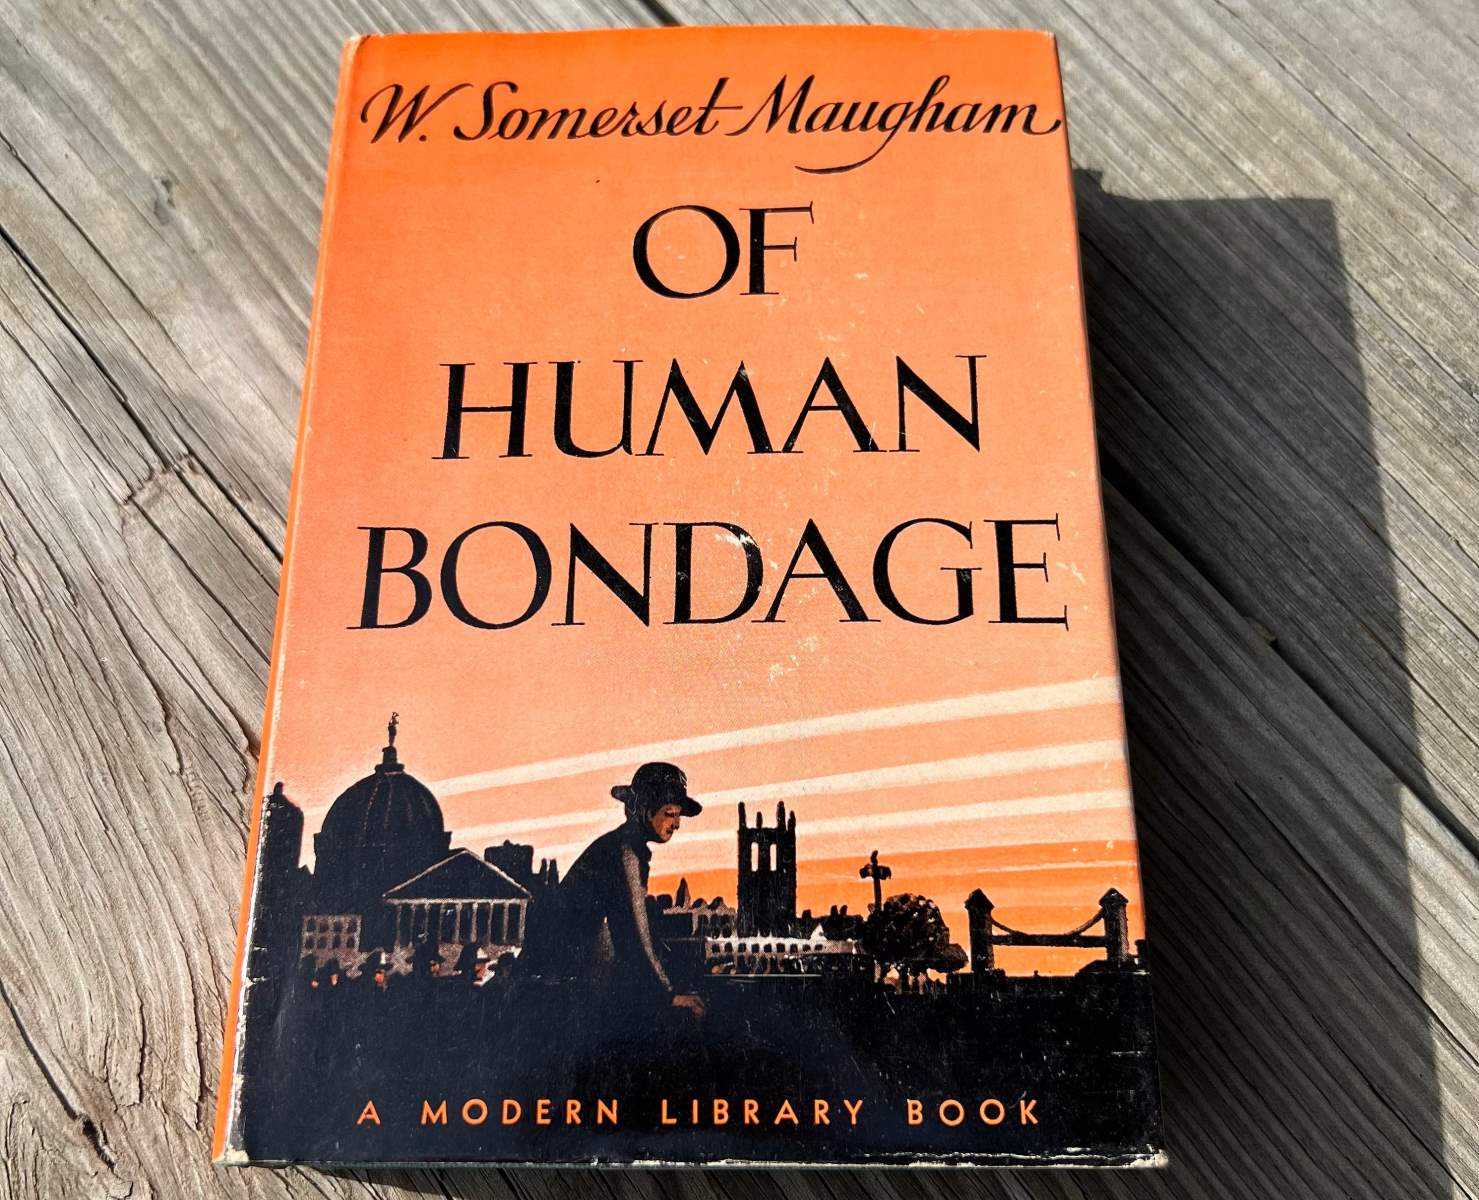 19-astounding-facts-about-of-human-bondage-w-somerset-maugham